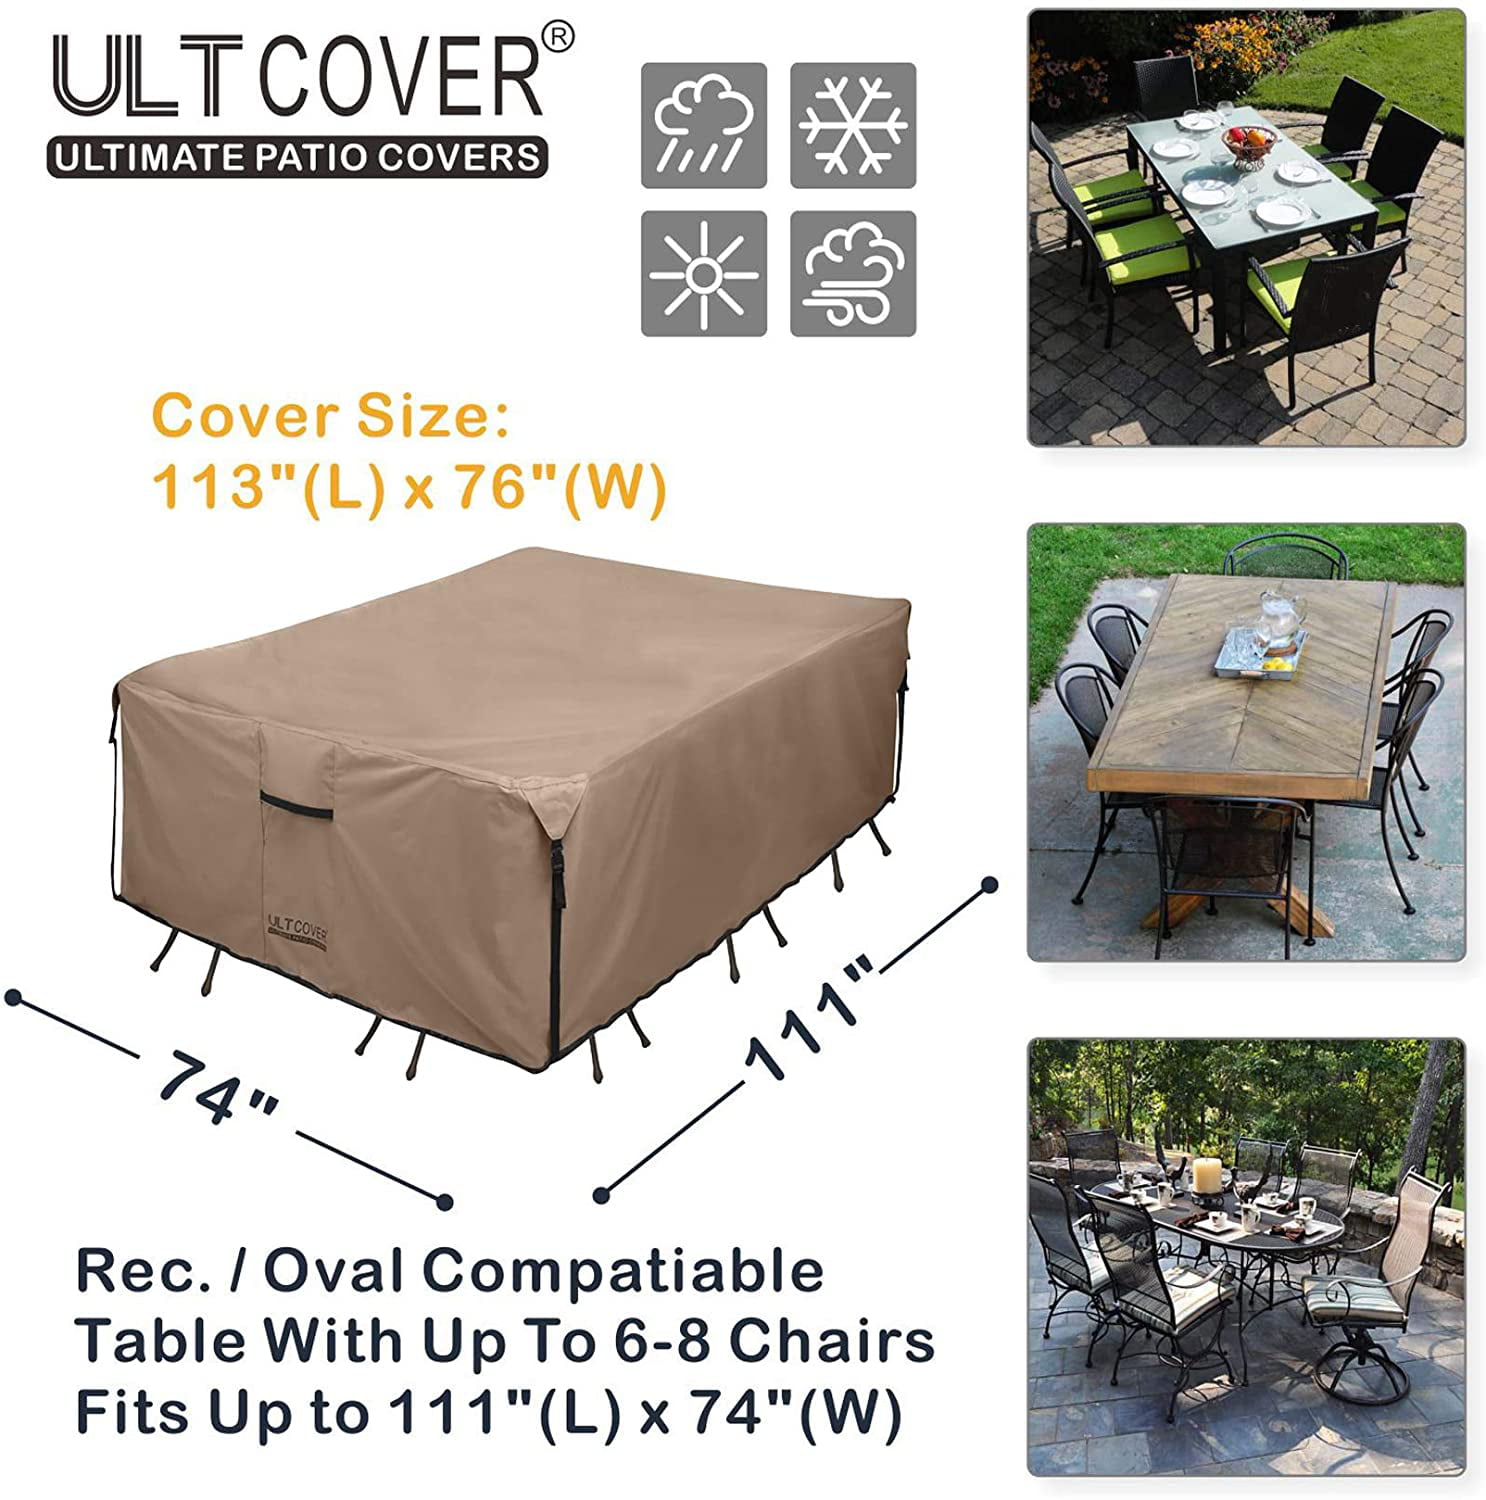 Waterproof 600D Heavy Duty Outdoor Table&Chair Set Cover w/Storage Bag Patio Rectangular Table Cover 74 Length x 48 Width x 28.01 Height Tear-Resistant Beige 